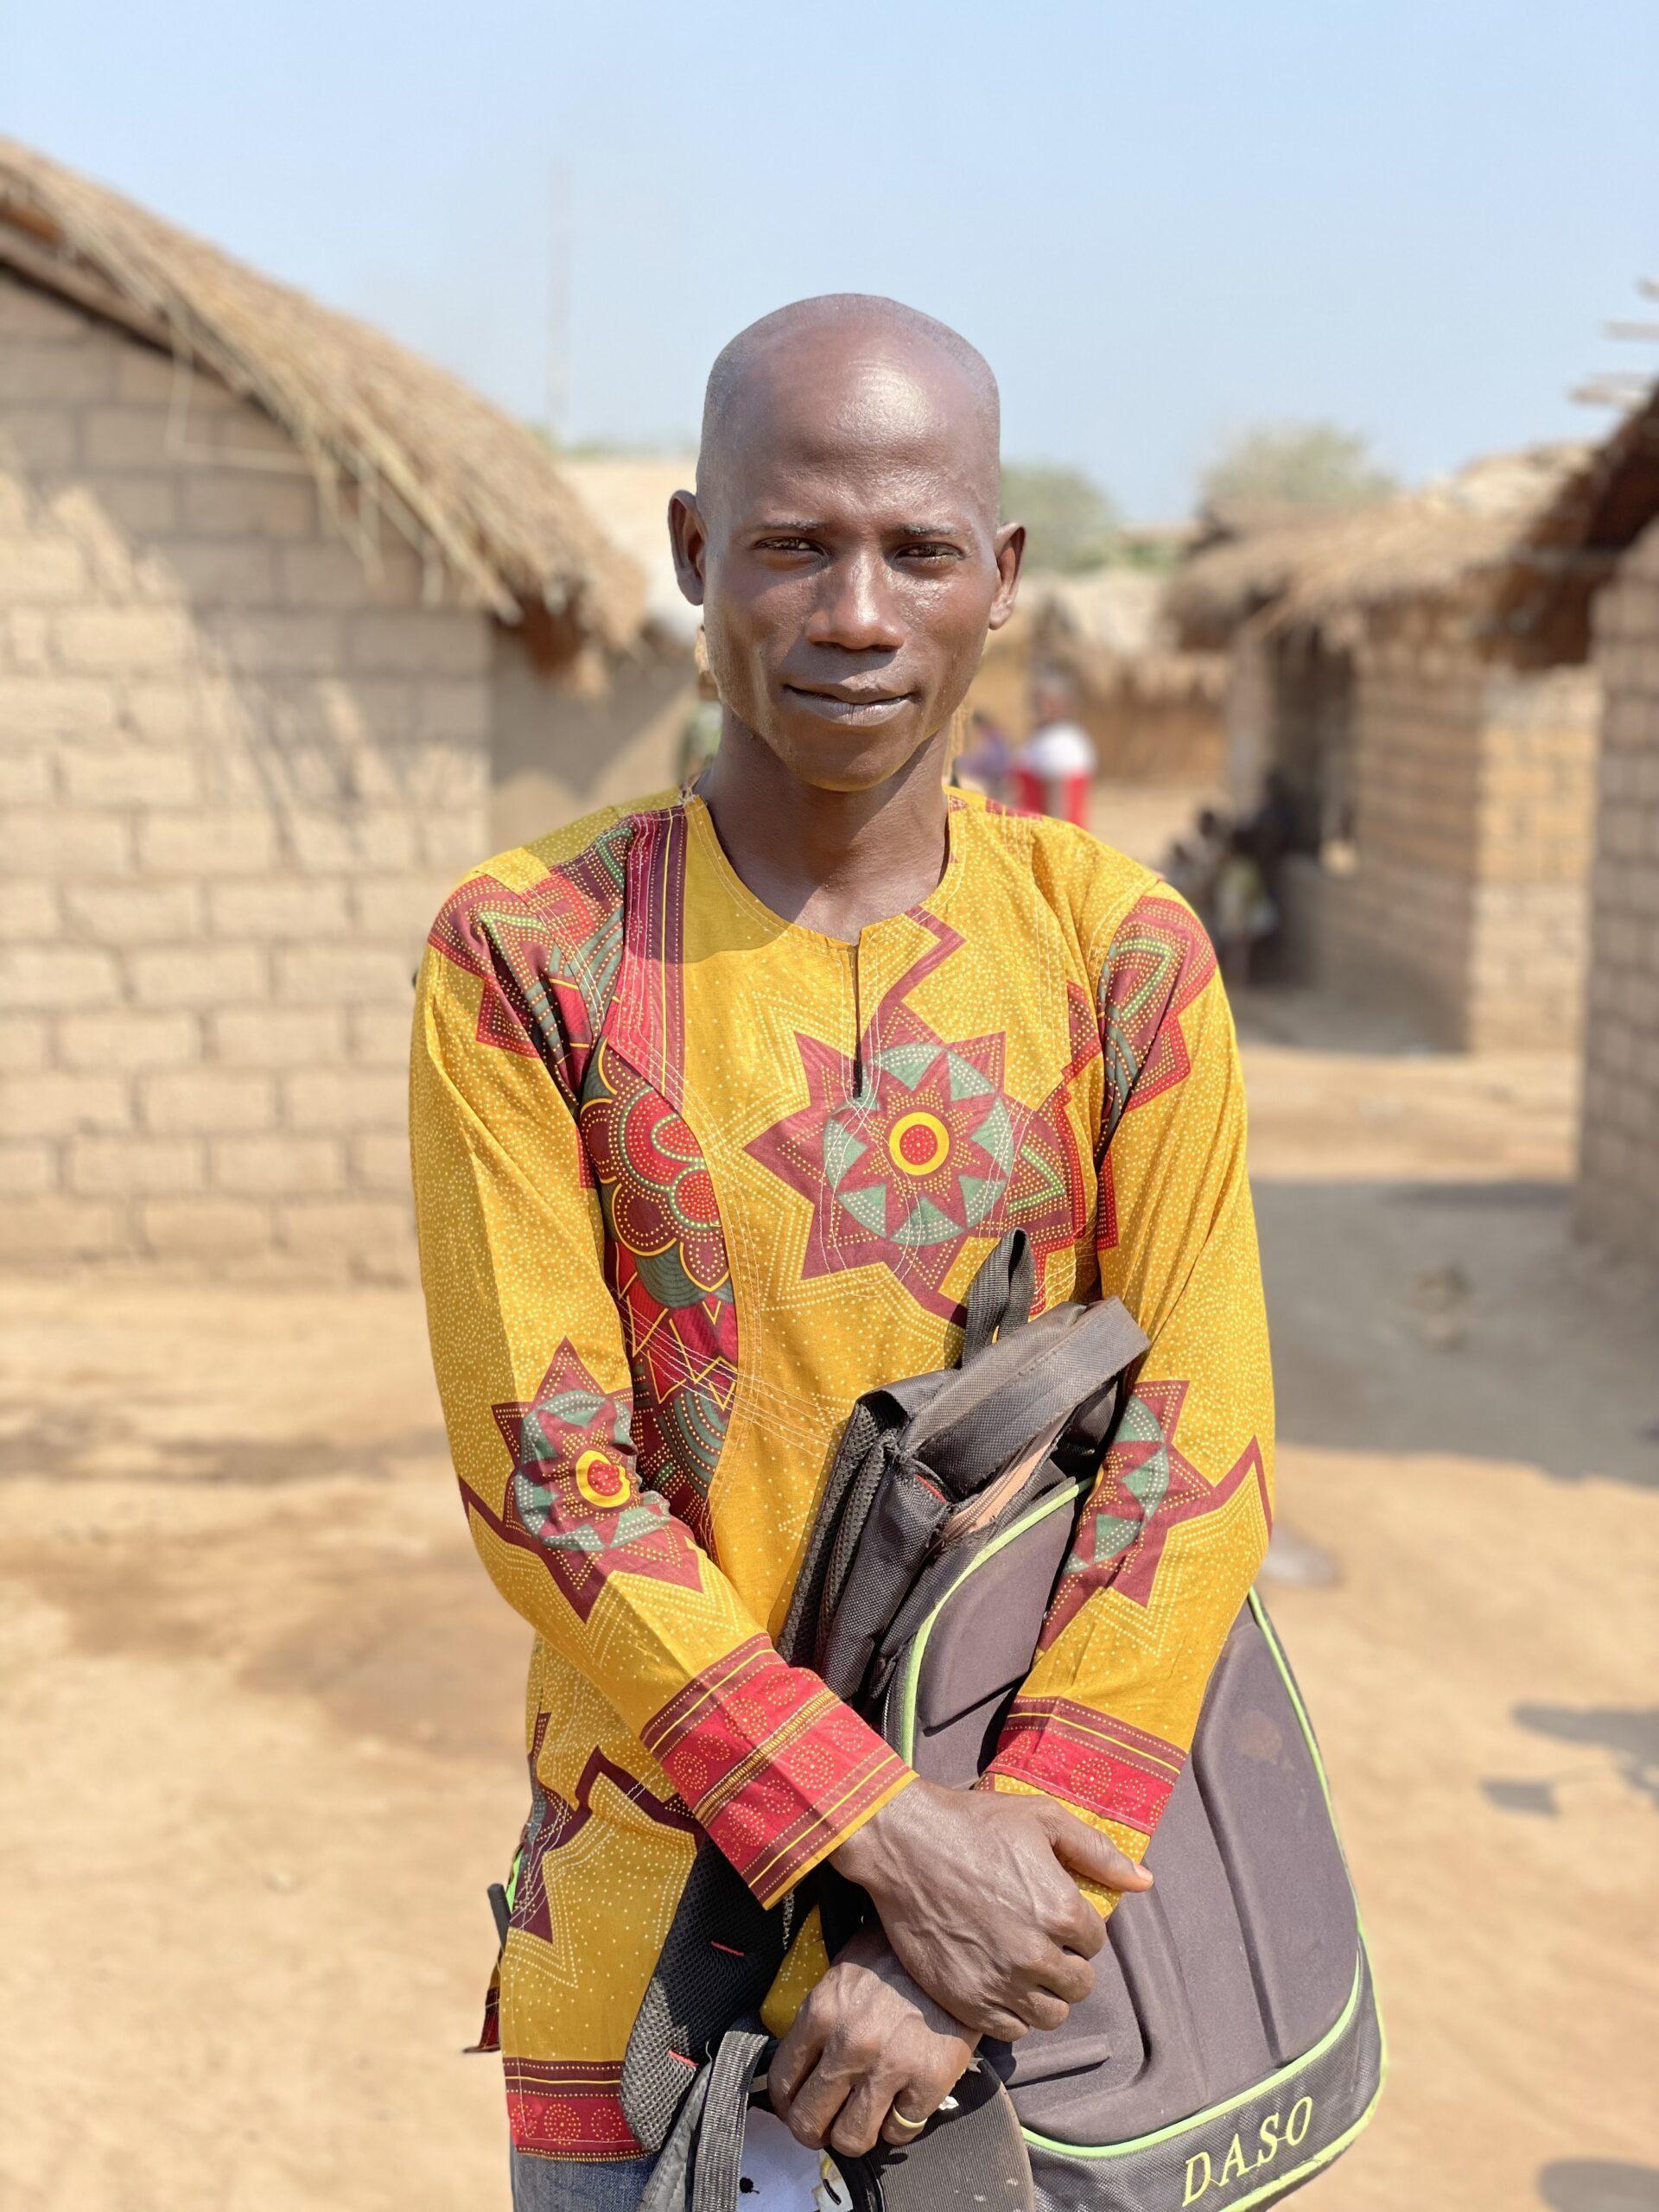 CENTRAL AFRICAN REPUBLIC | JAN. 10, 2021 — Finding Healing Through Trauma Ministry